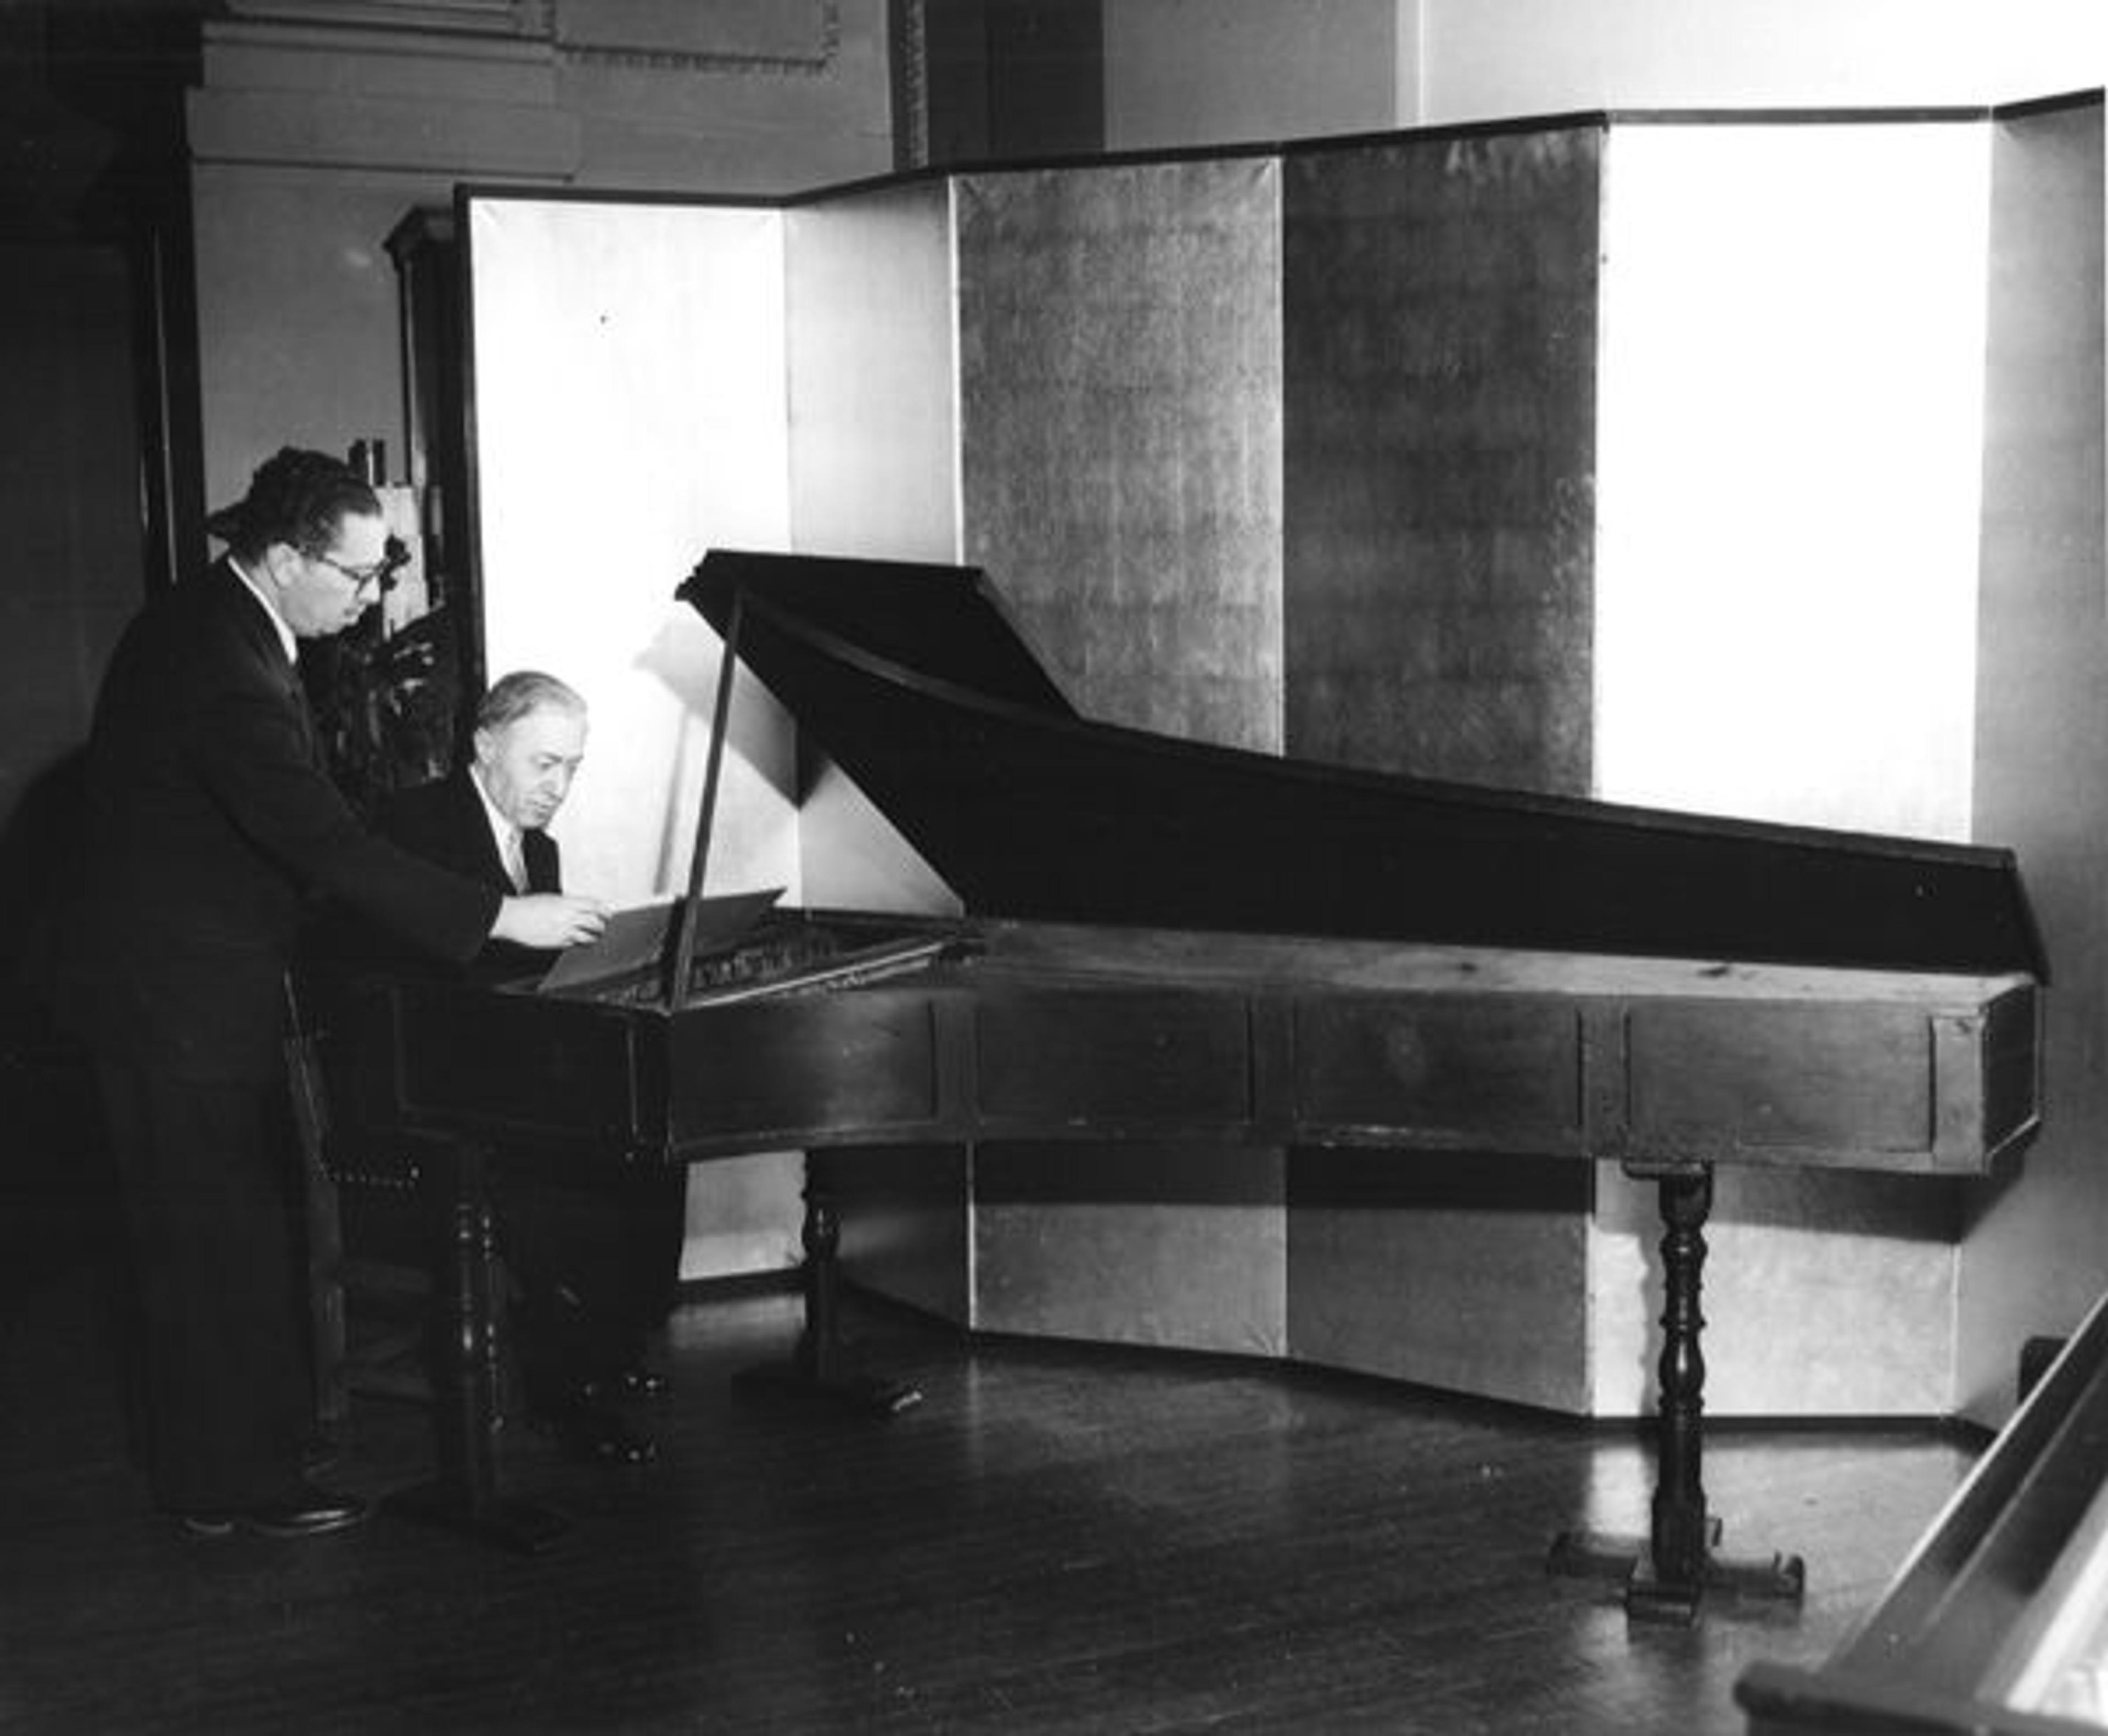 Pianist Mieczyslaw Horszowski first played at the Met for a Member concert in 1944, and played frequently thereafter for more than thirty years. Here, at a concert in the 1940s, Winternitz turns pages for Horszowski.